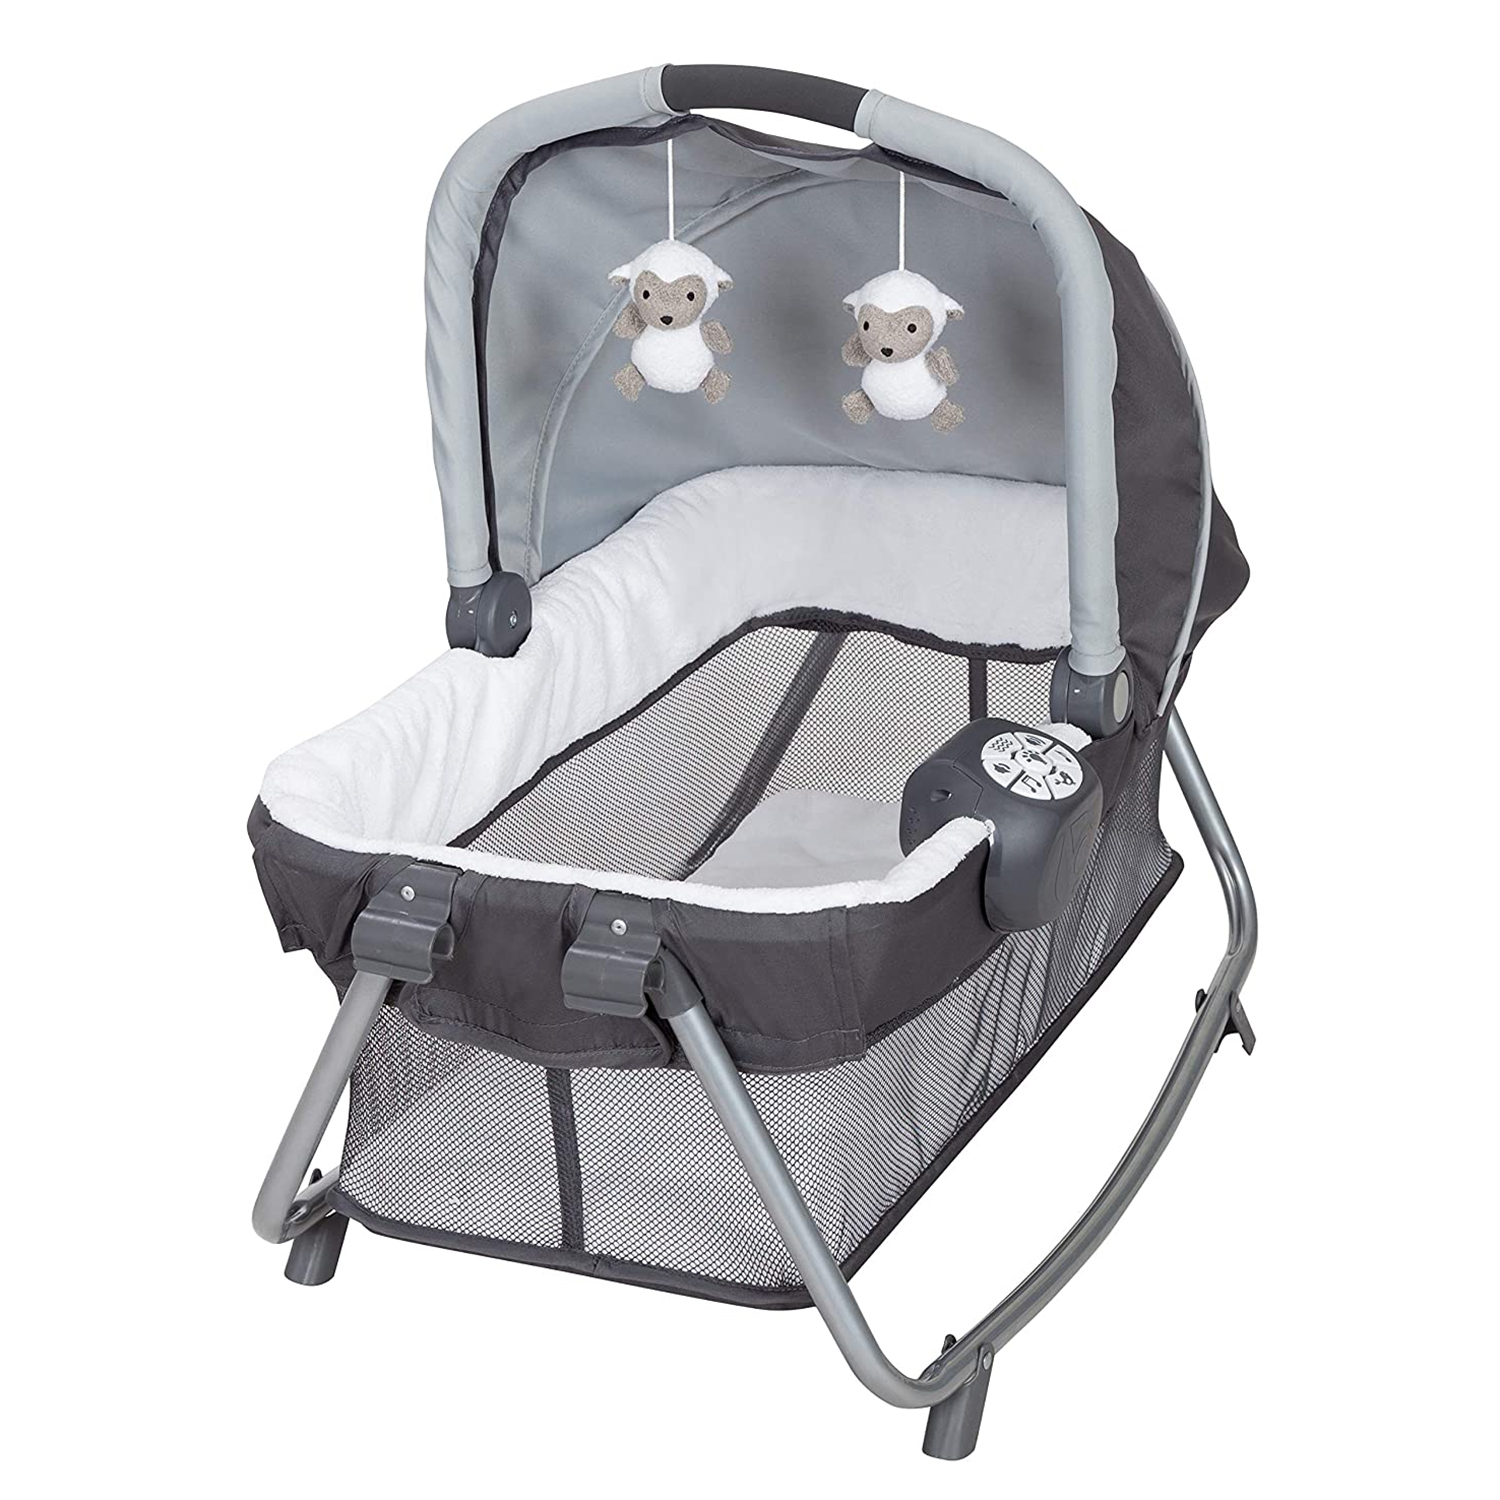 Baby Trend Retreat Nursery Center Playard with Bassinet and Travel Bag - Robin Gray - Gray - image 5 of 11